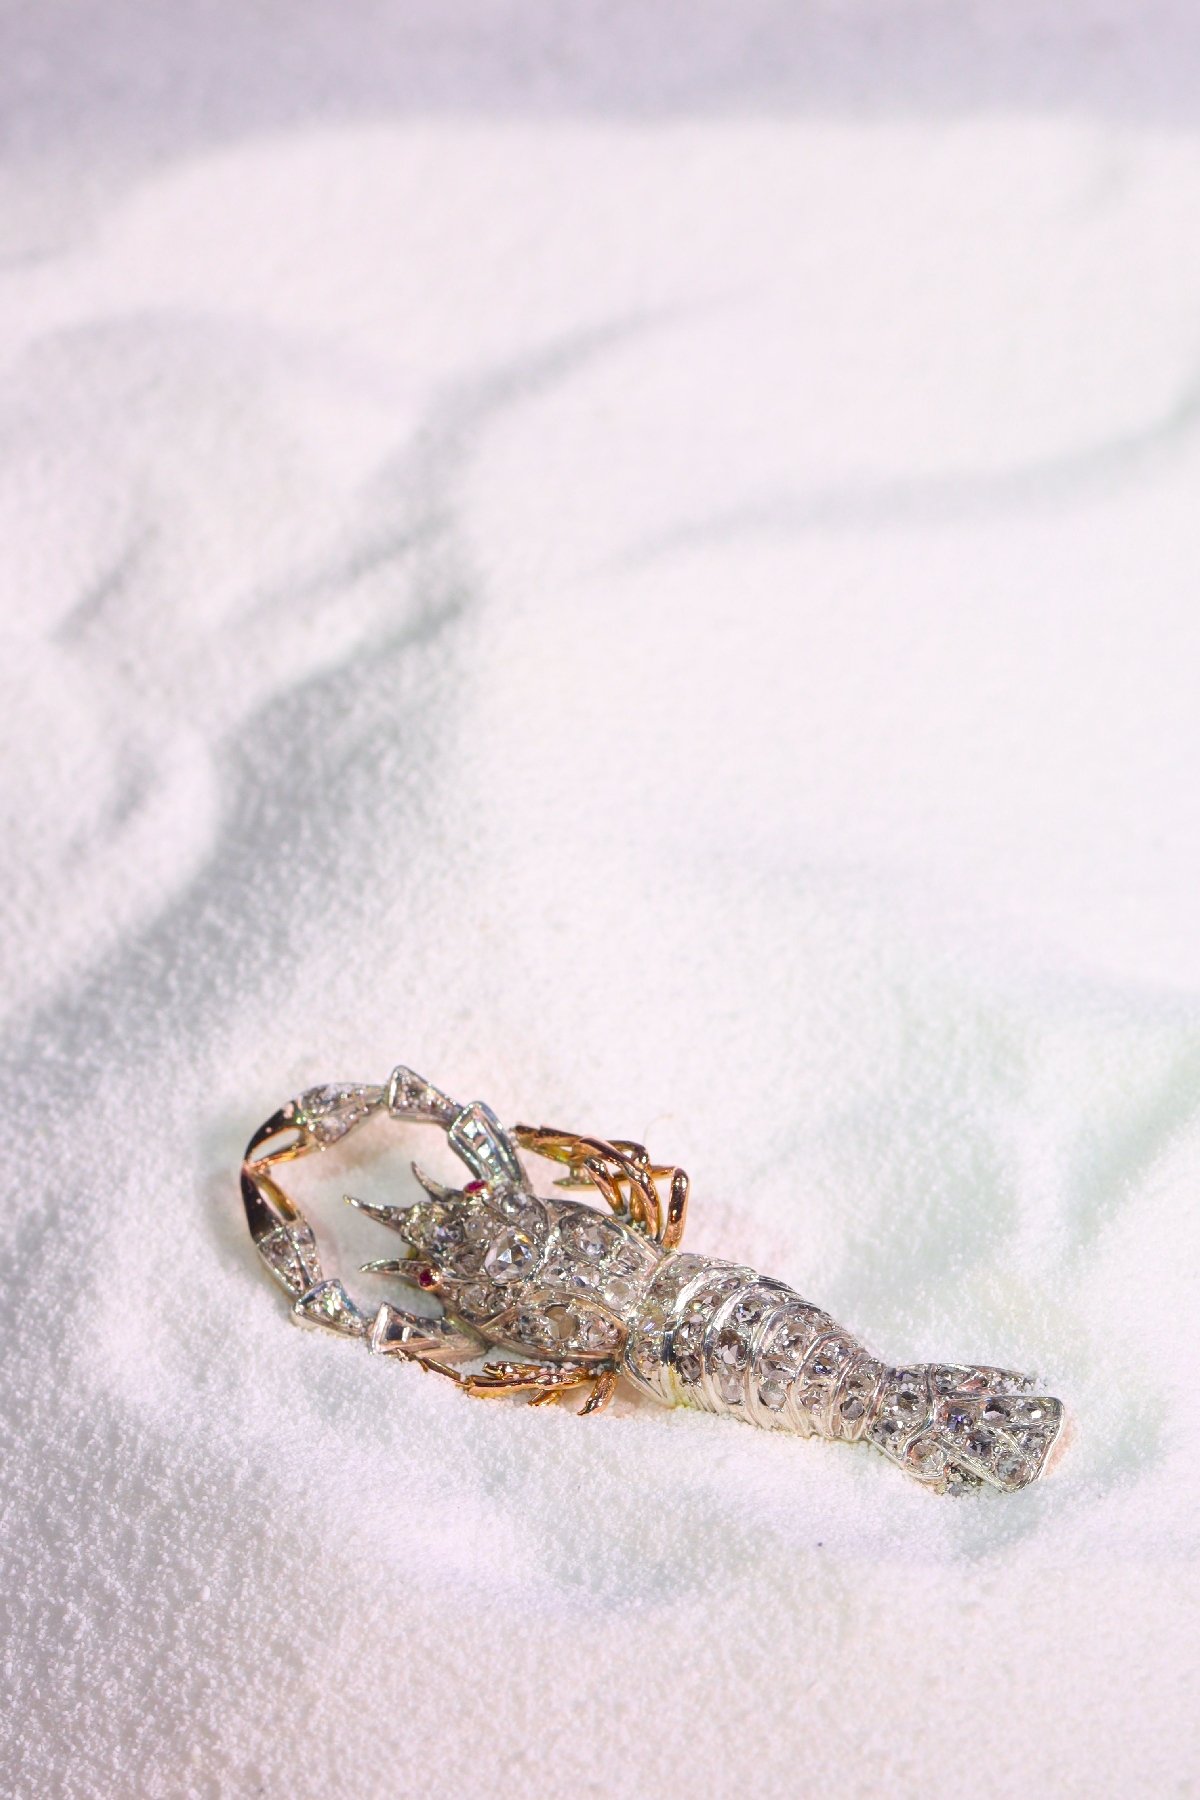 Click the picture to get to see this Antique gold and silver crayfish brooch fully embelished with rose cut diamonds